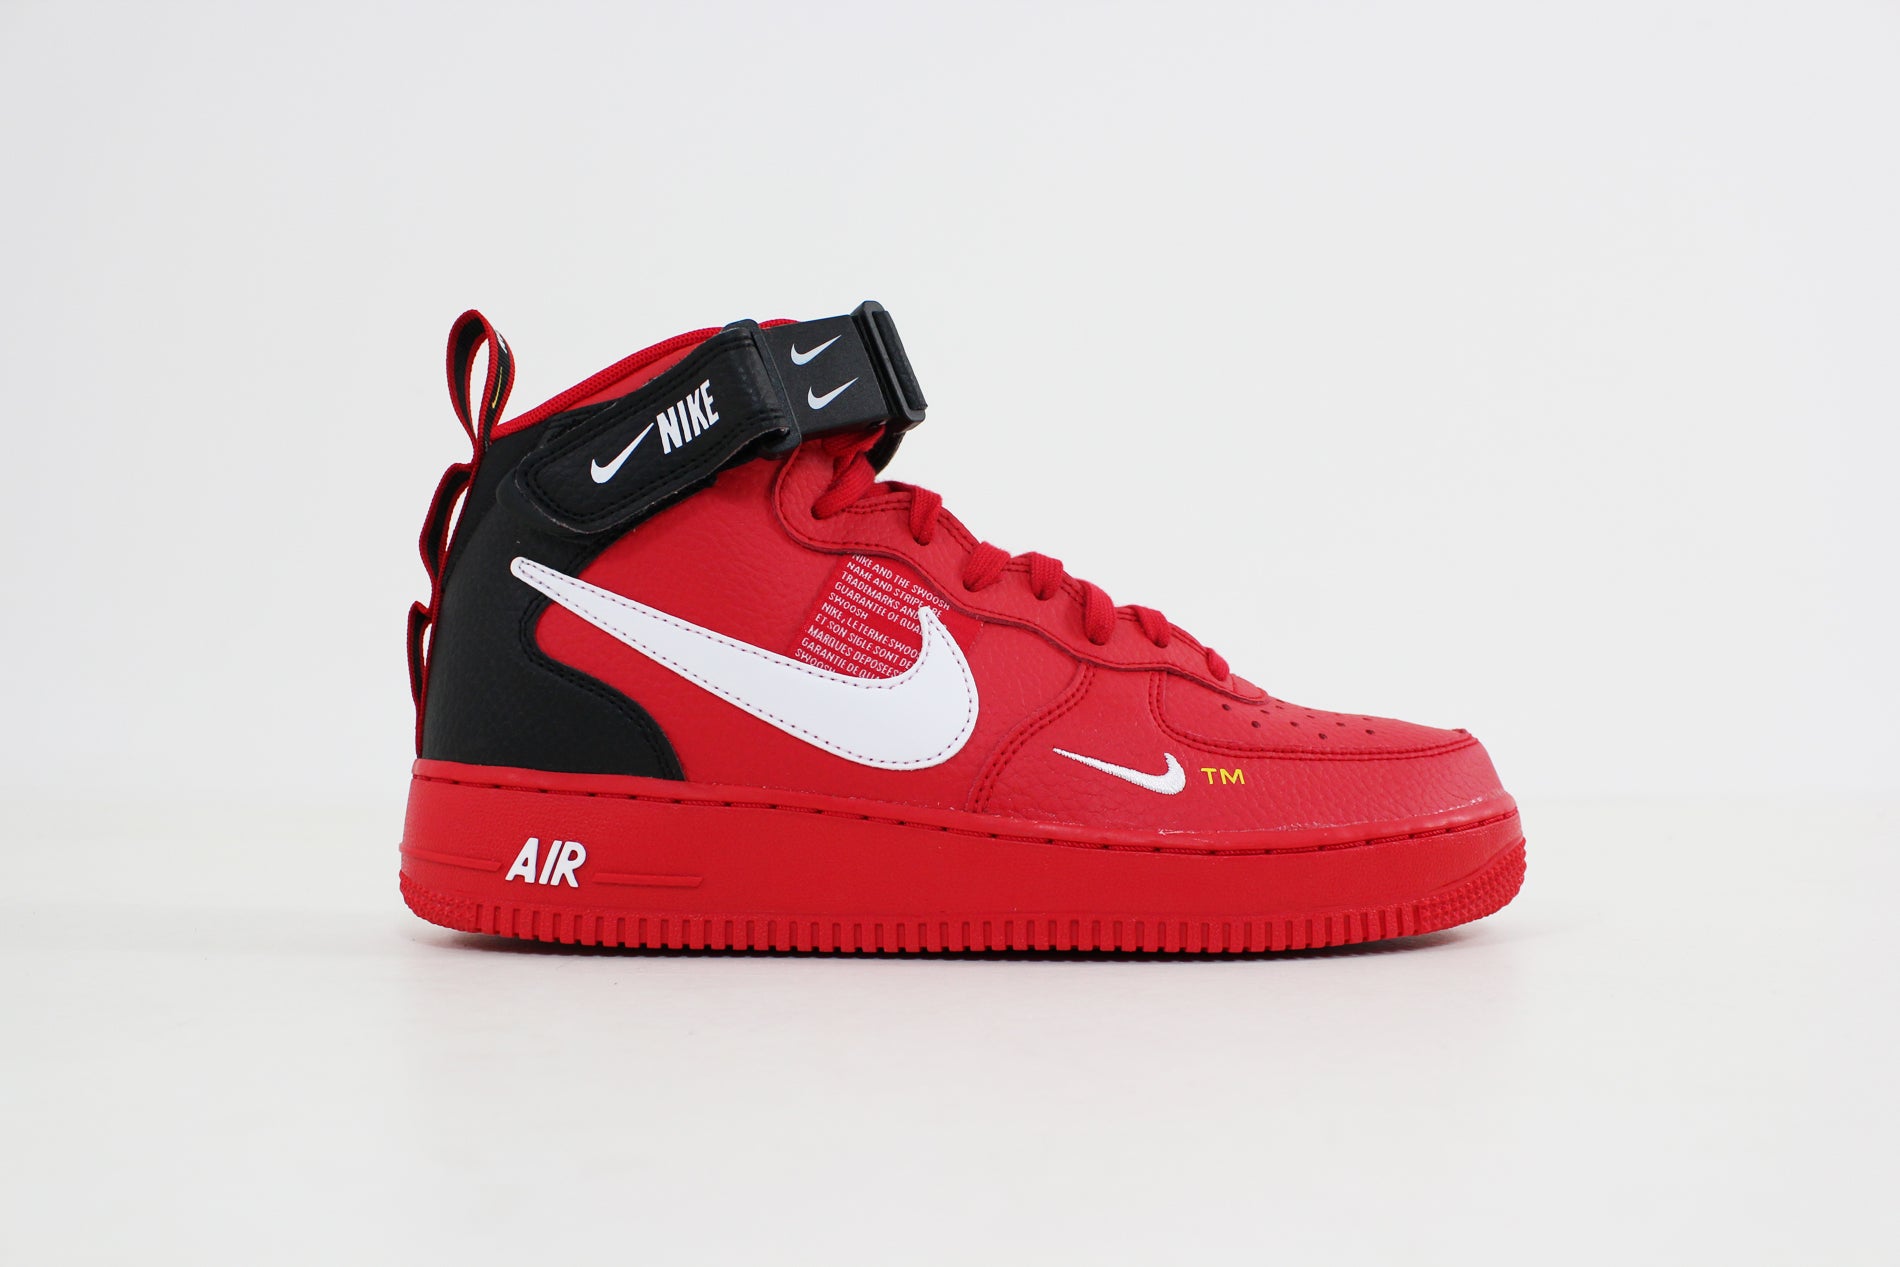 Nike Air Force 1 Lv8 Schwarz Rot Shop Clothing Shoes Online